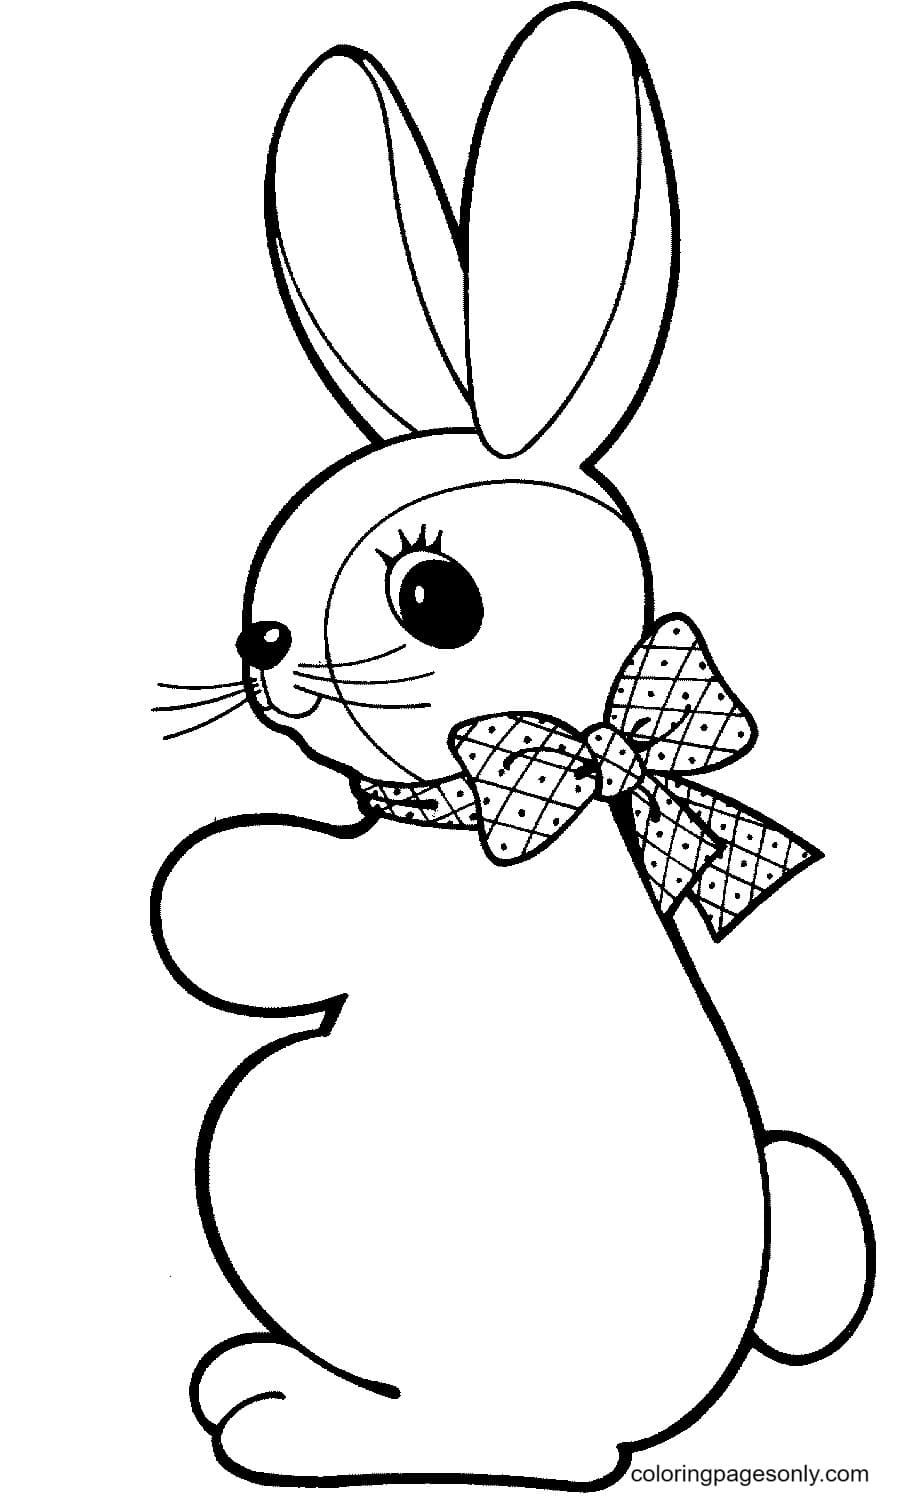 Cute Bunnies with Ribbon Coloring Page